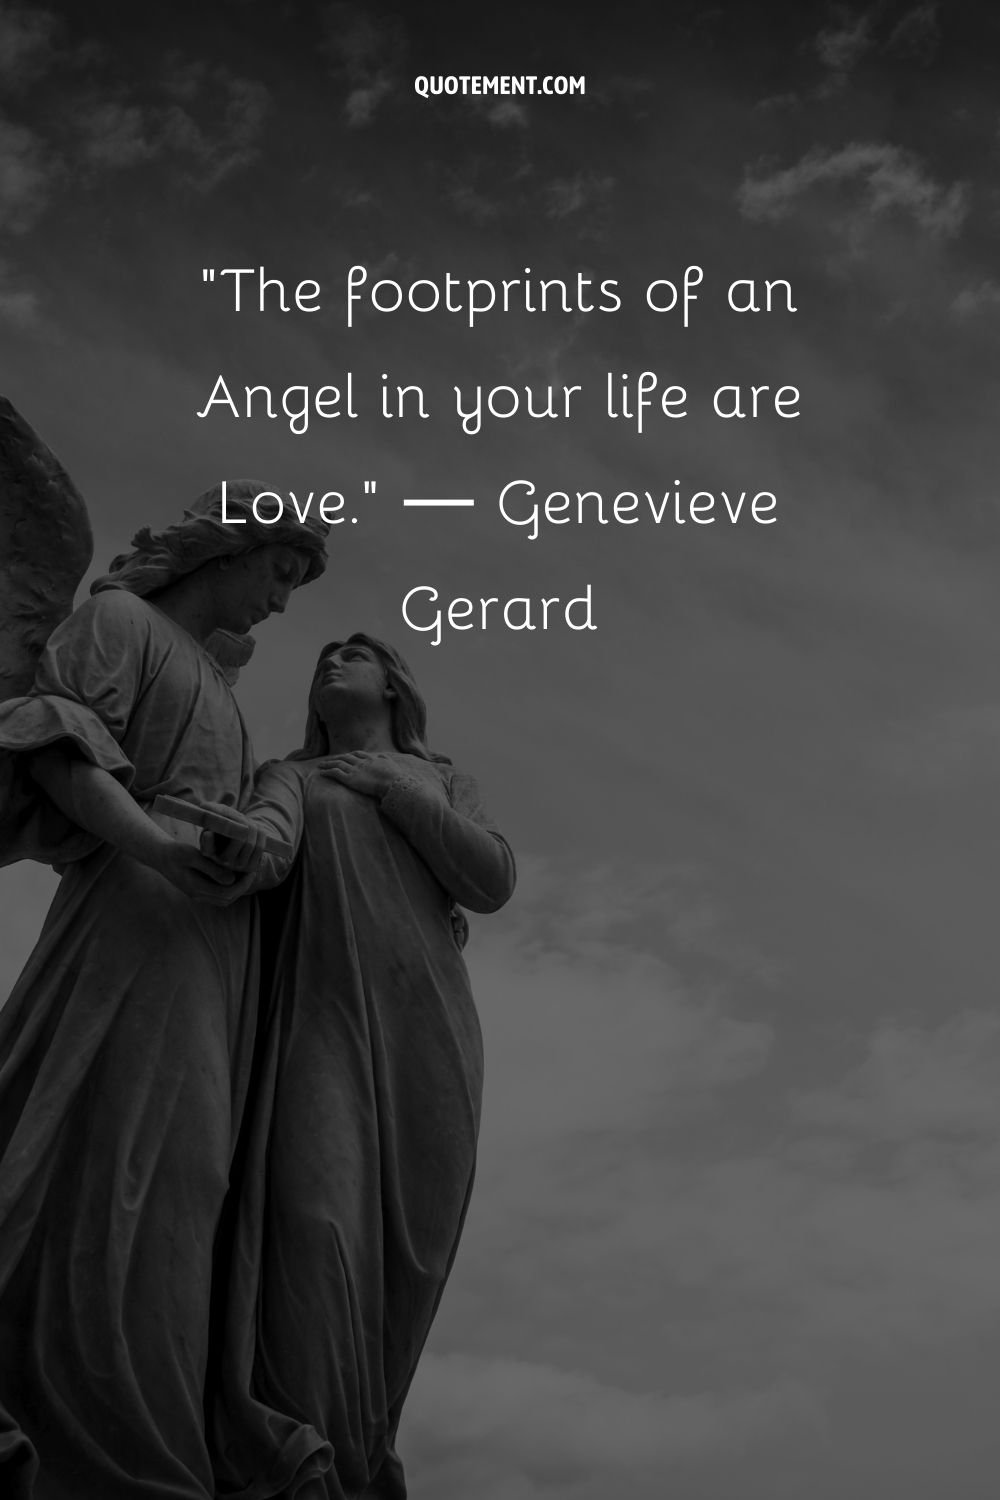 The footprints of an Angel in your life are Love.